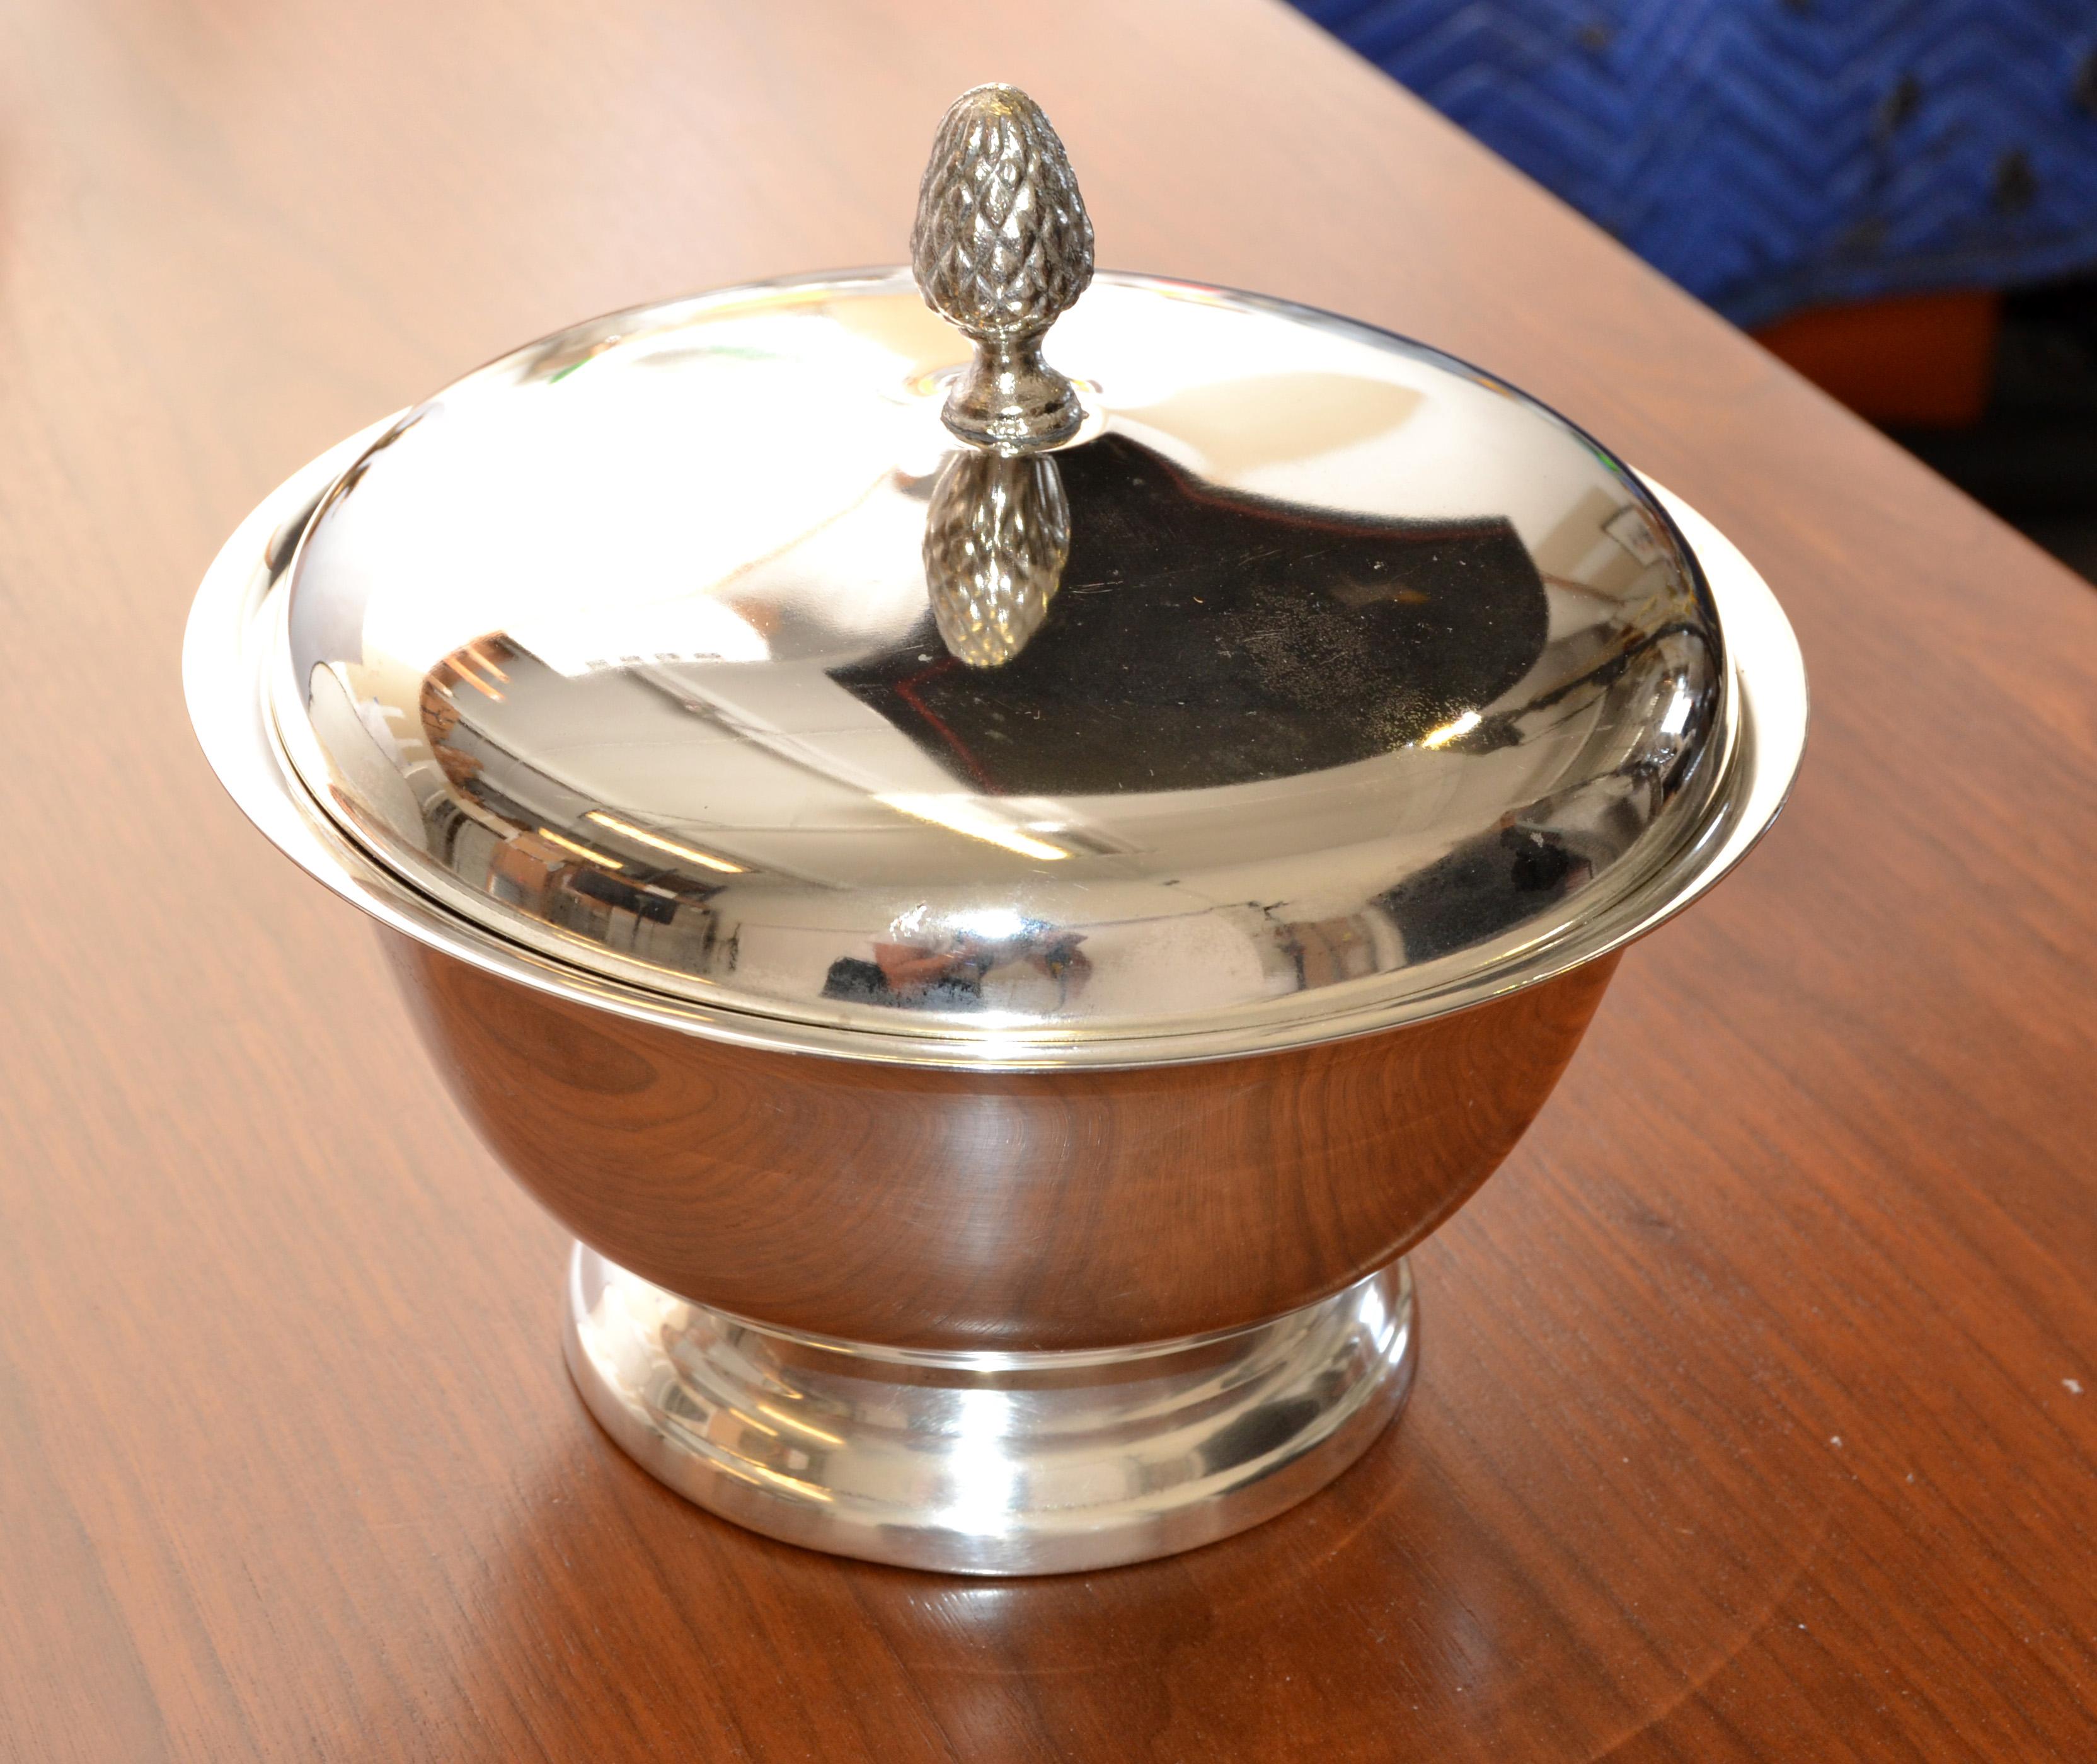 is towle silverplate real silver